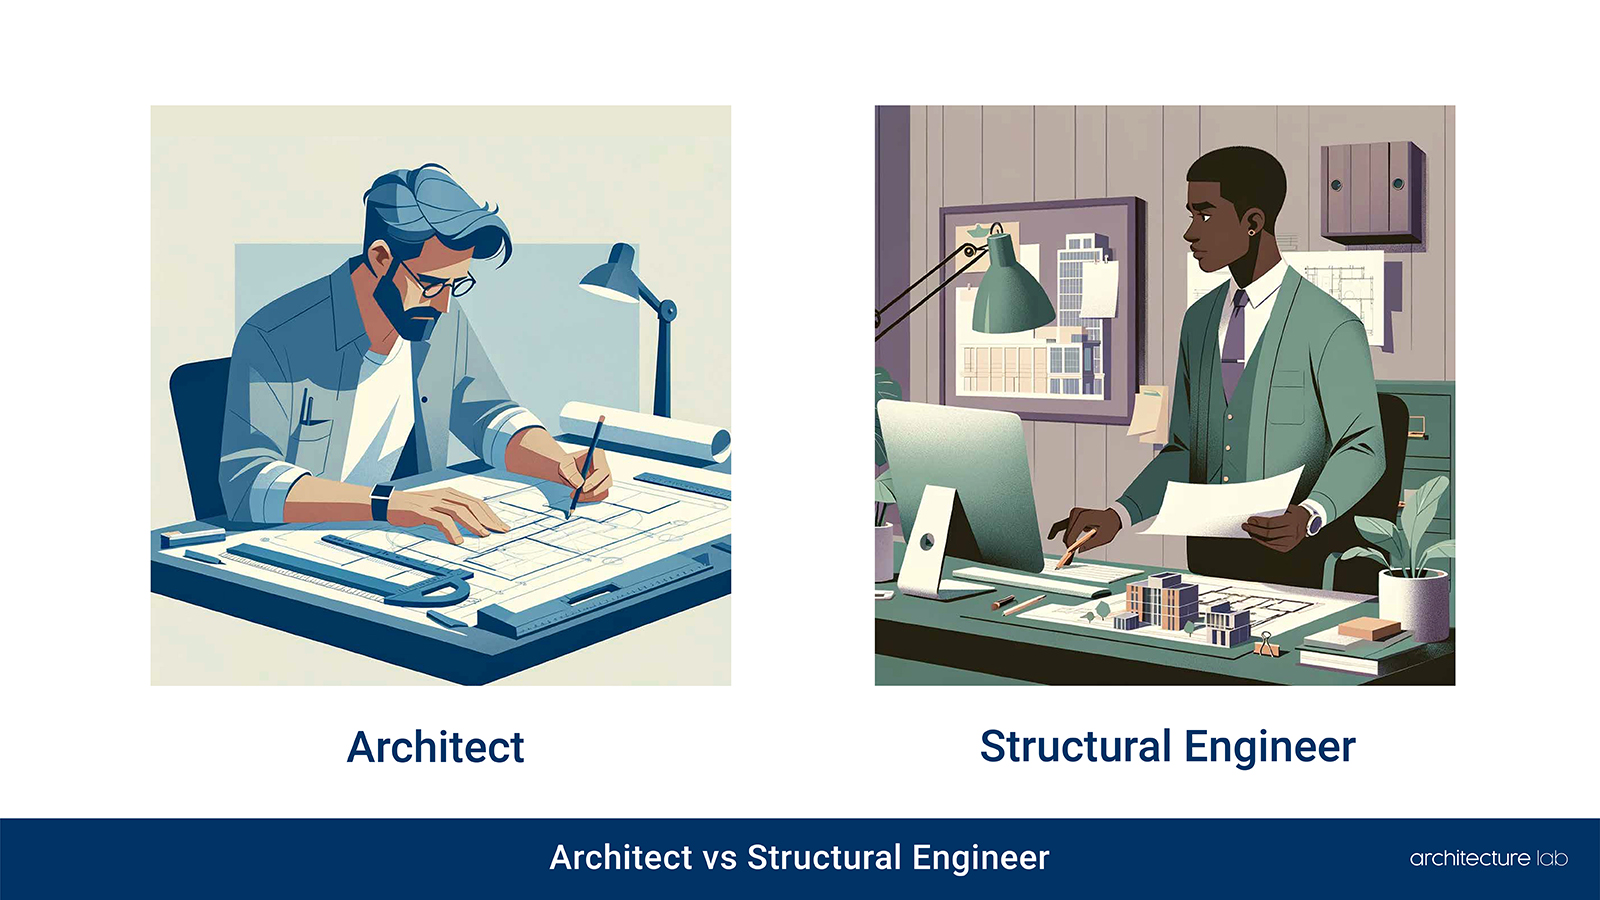 Architect vs. Structural engineer: differences, similarities, duties, salaries, and education